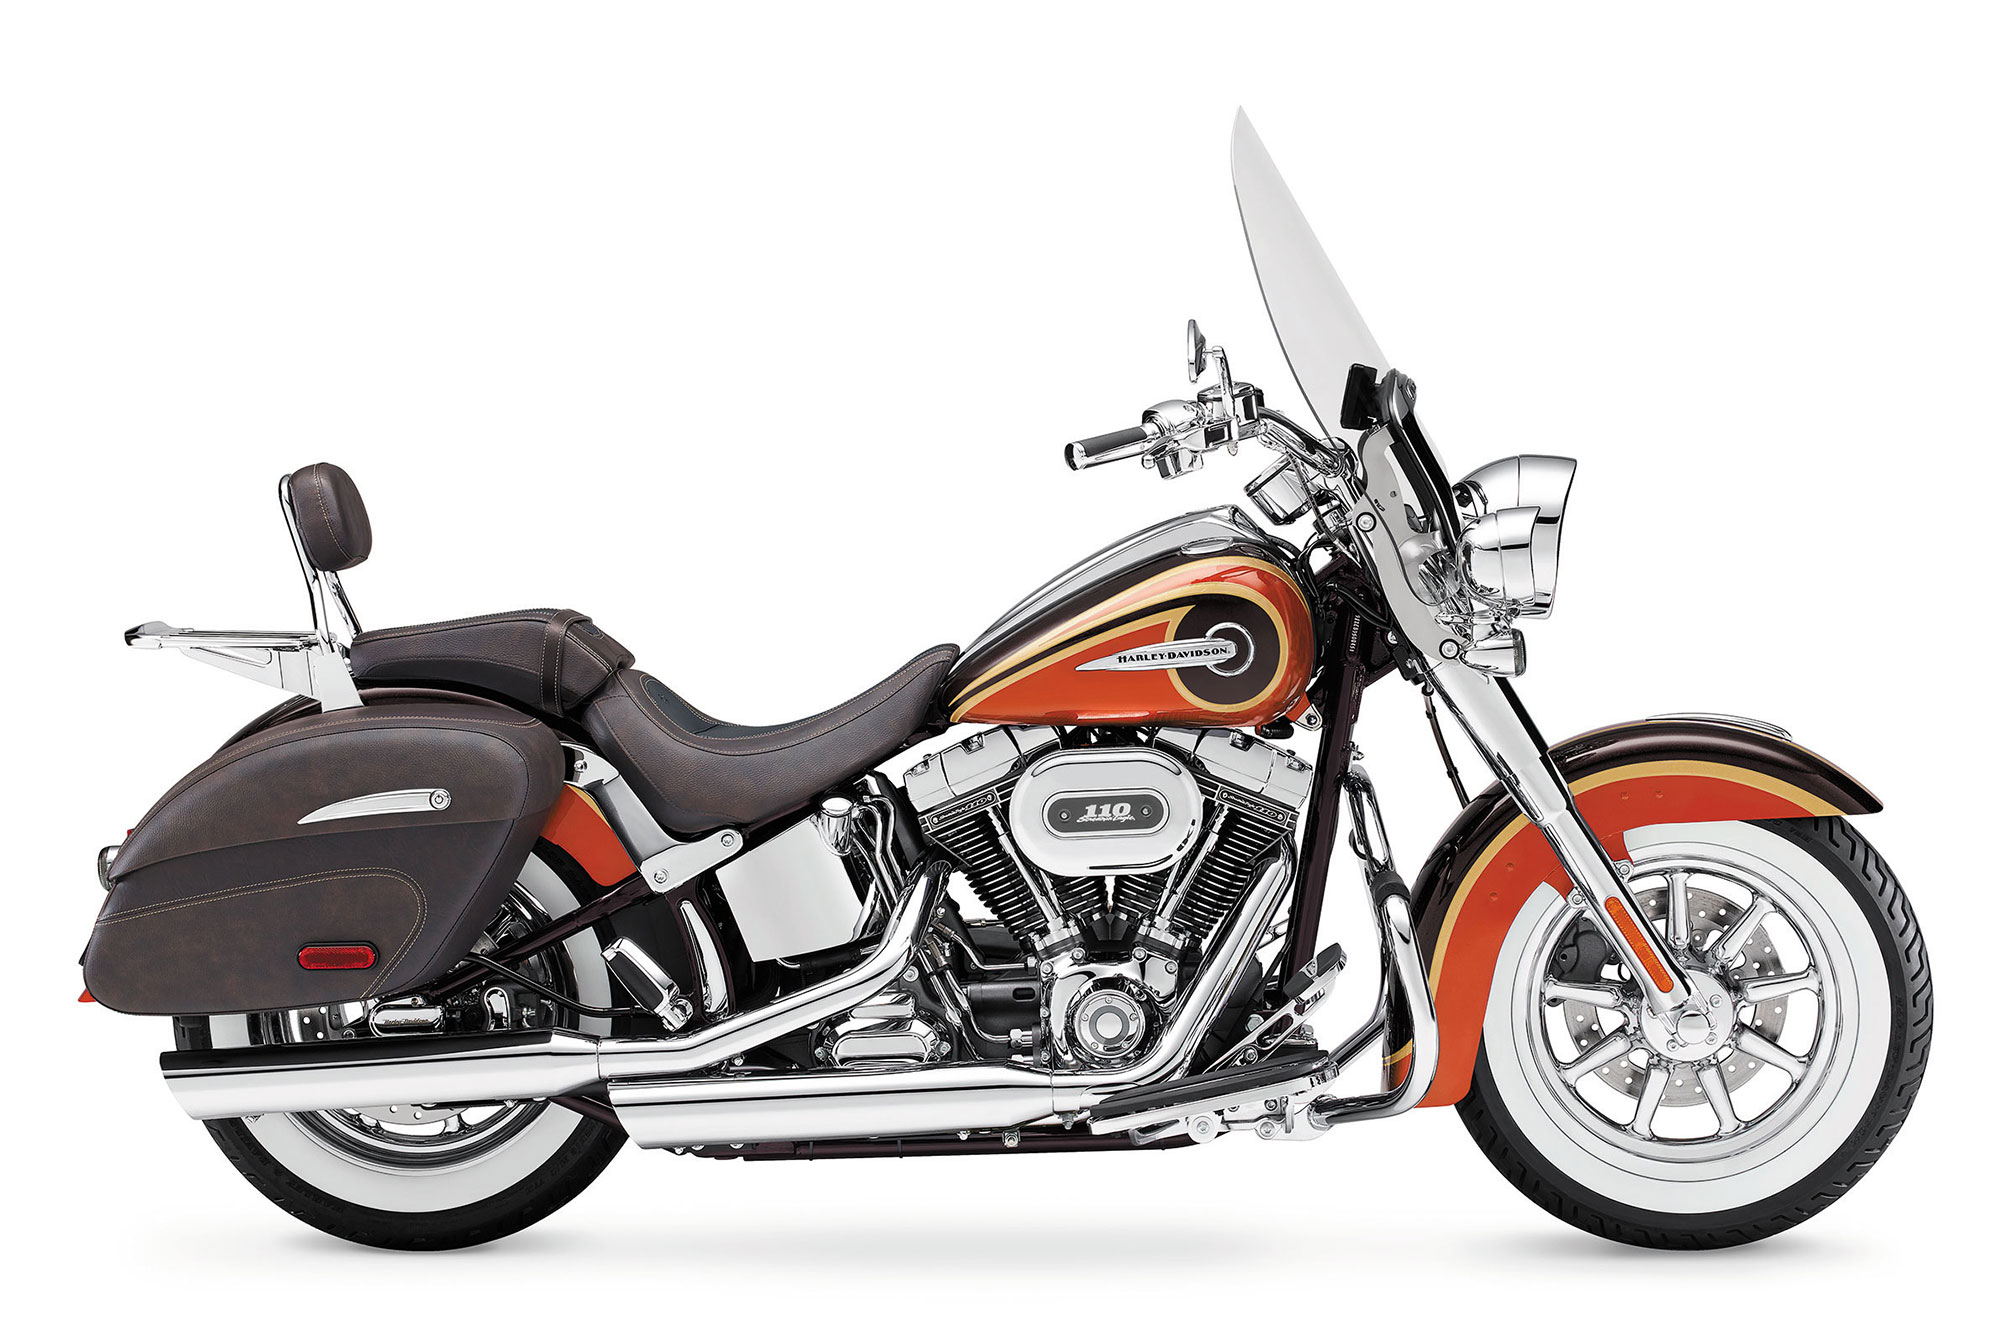 Fichiers Tuning Haute Qualité Harley Davidson 1800 Electra / Glide / Road King / Softail 1800 CVO Street Glide  98hp